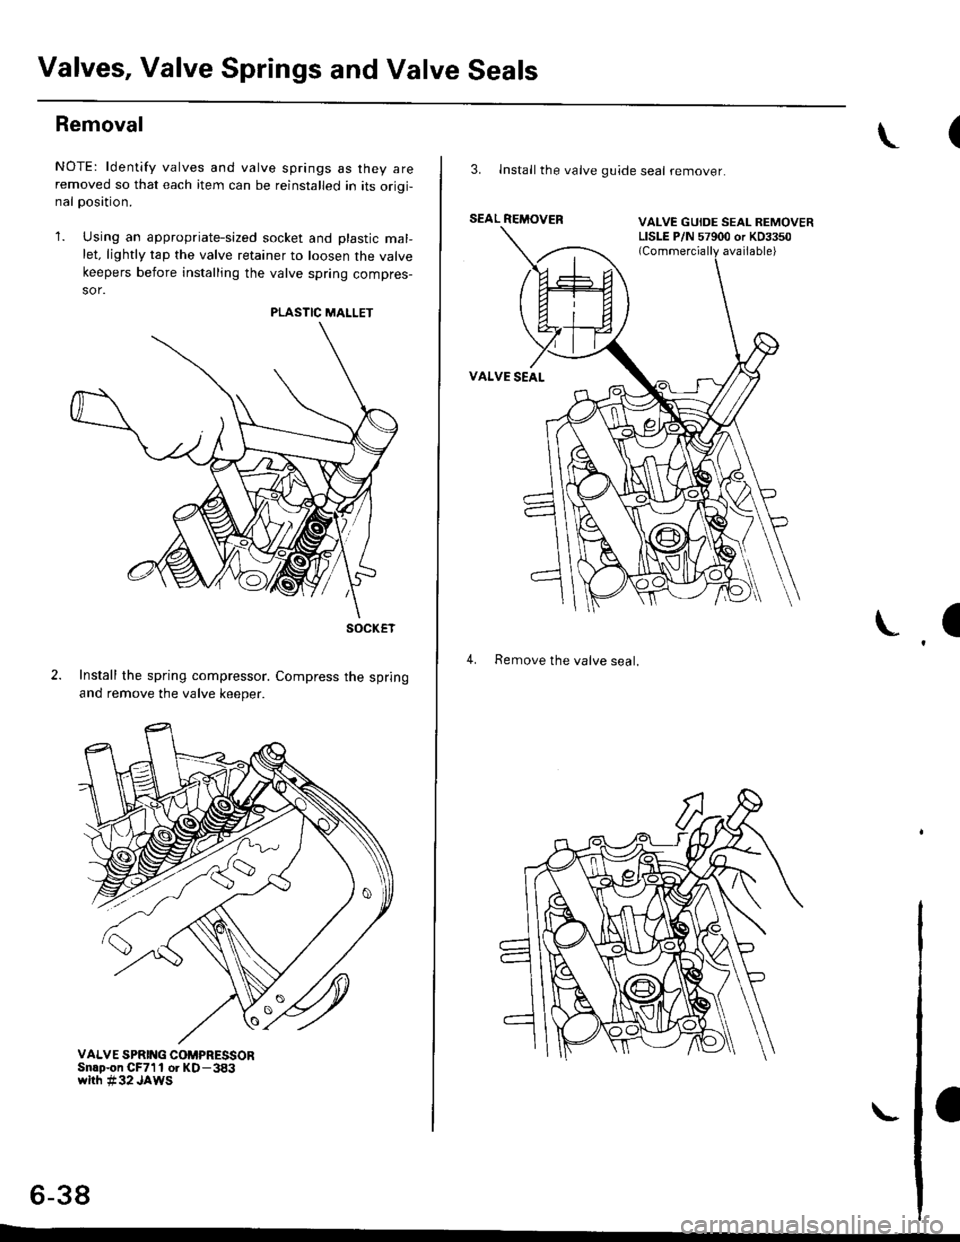 HONDA CIVIC 1997 6.G Workshop Manual Valves, Valve Springs and Valve Seals
Removal
NOTE: ldentify valves and valve springs as they areremoved so that each item can be reinstalled in its orioi-nal oosition.
1. Using an appropriate-sized 